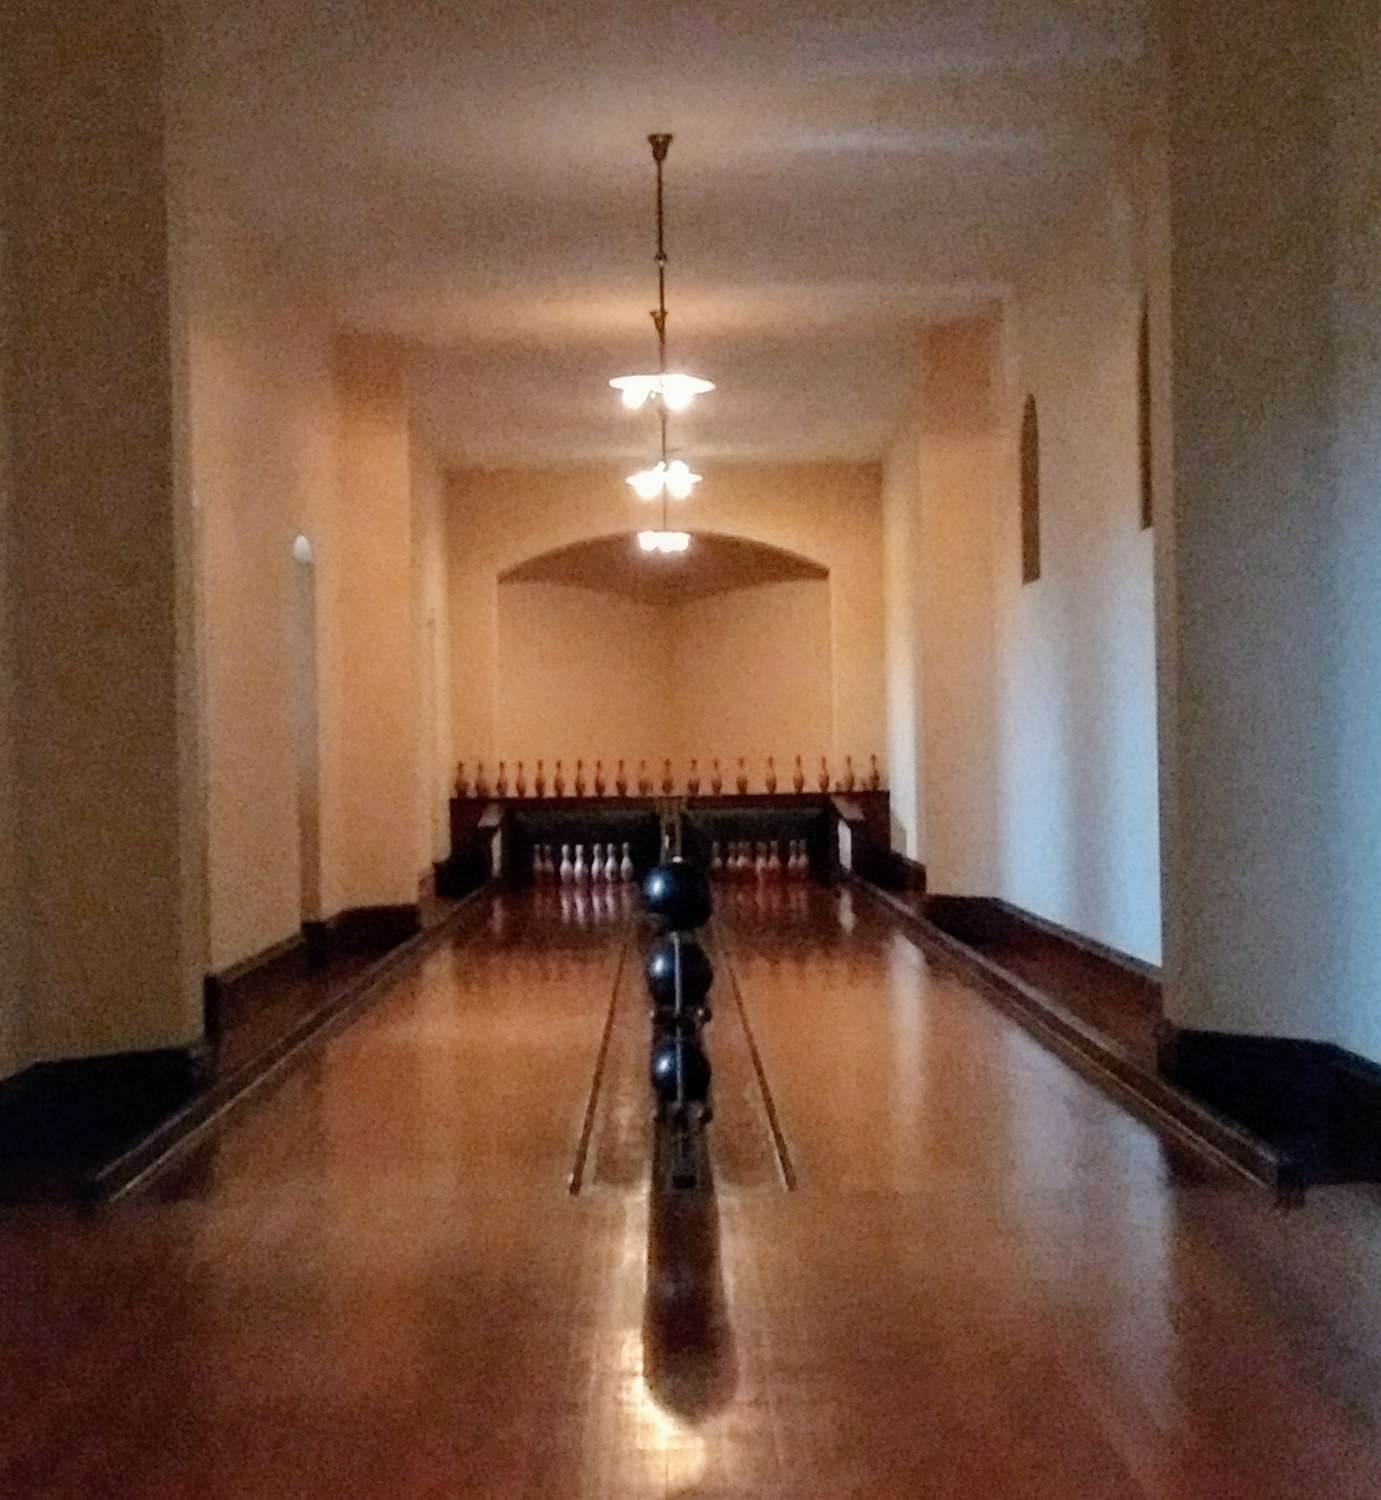 Private bowling alley